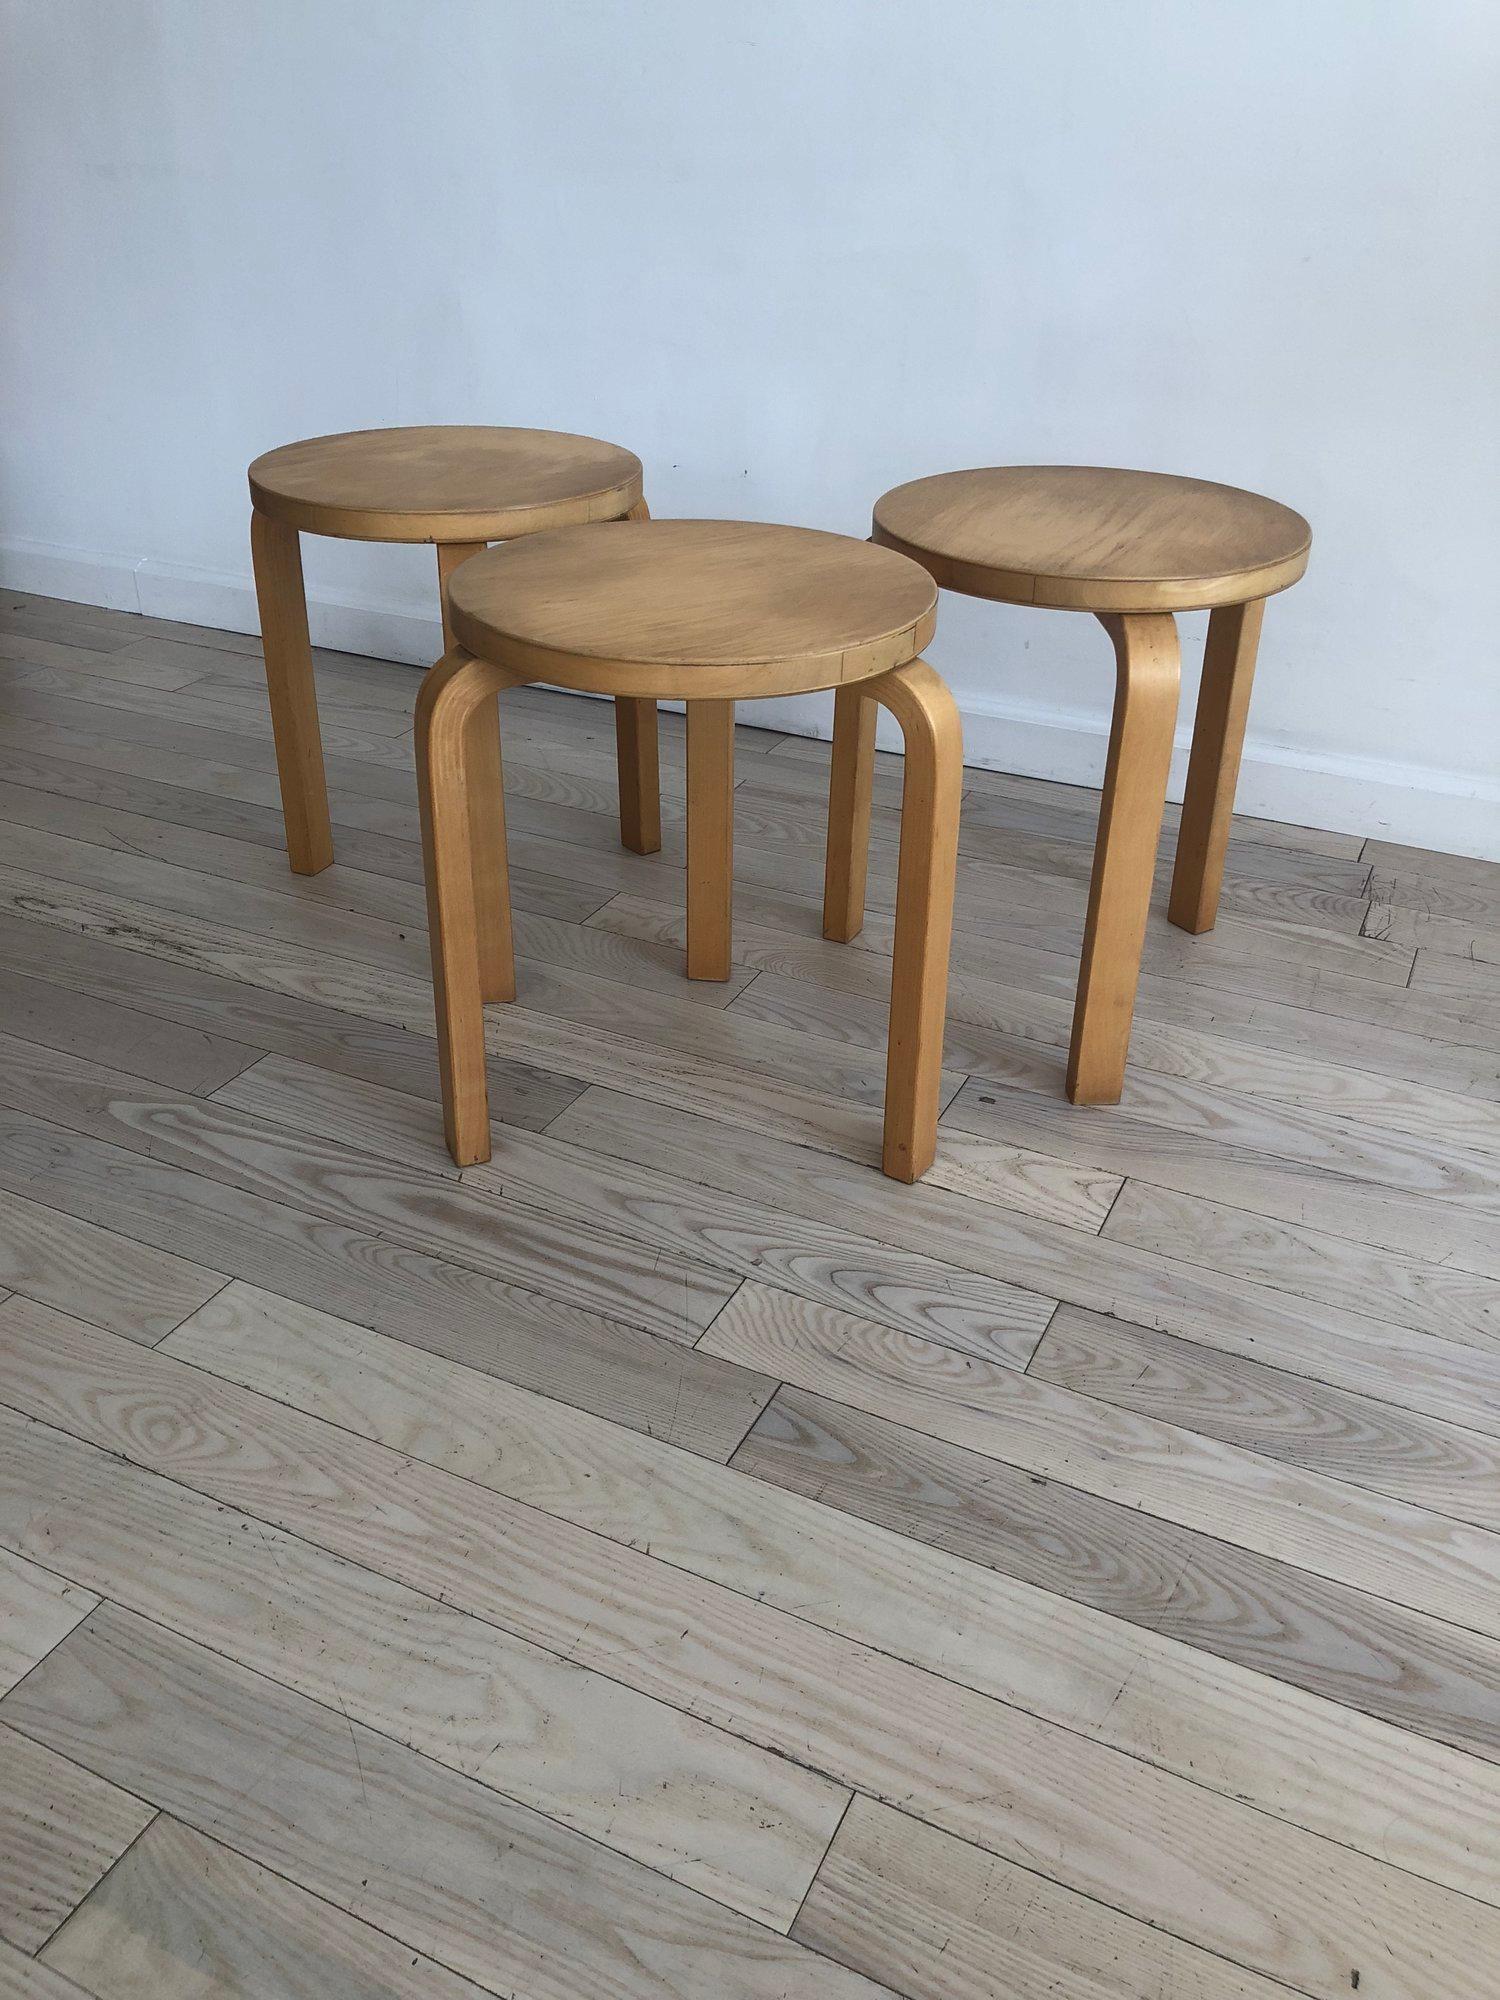 Alvar Aalto set of three Model 60 three-legged stacking stools. Originally designed in 1933. Beechwood, made in Finland. Some signs of age and use on the wood. Minor scuffs. Sold at ICF, this set of from the 1960s. Marked Alvar Aalto on the bottoms.